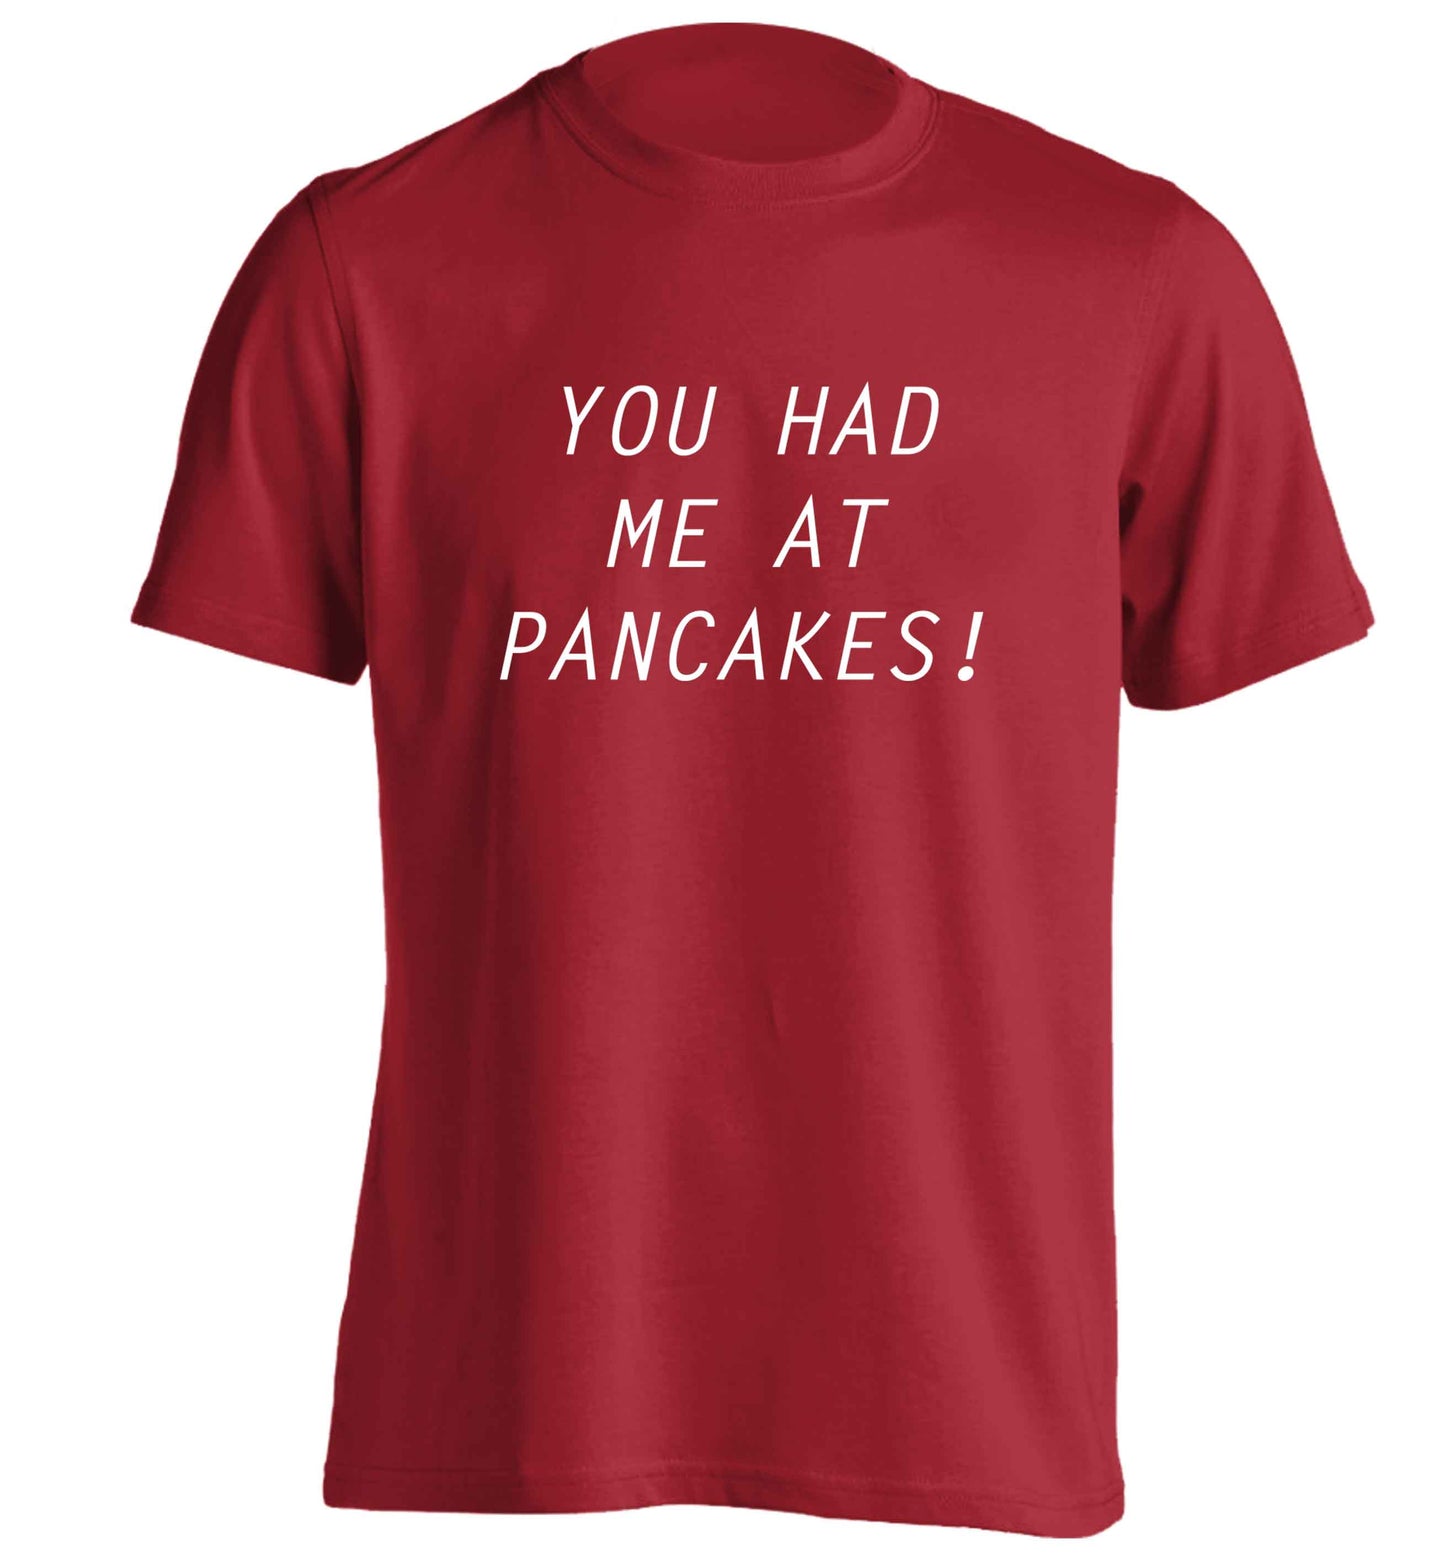 You had me at pancakes adults unisex red Tshirt 2XL